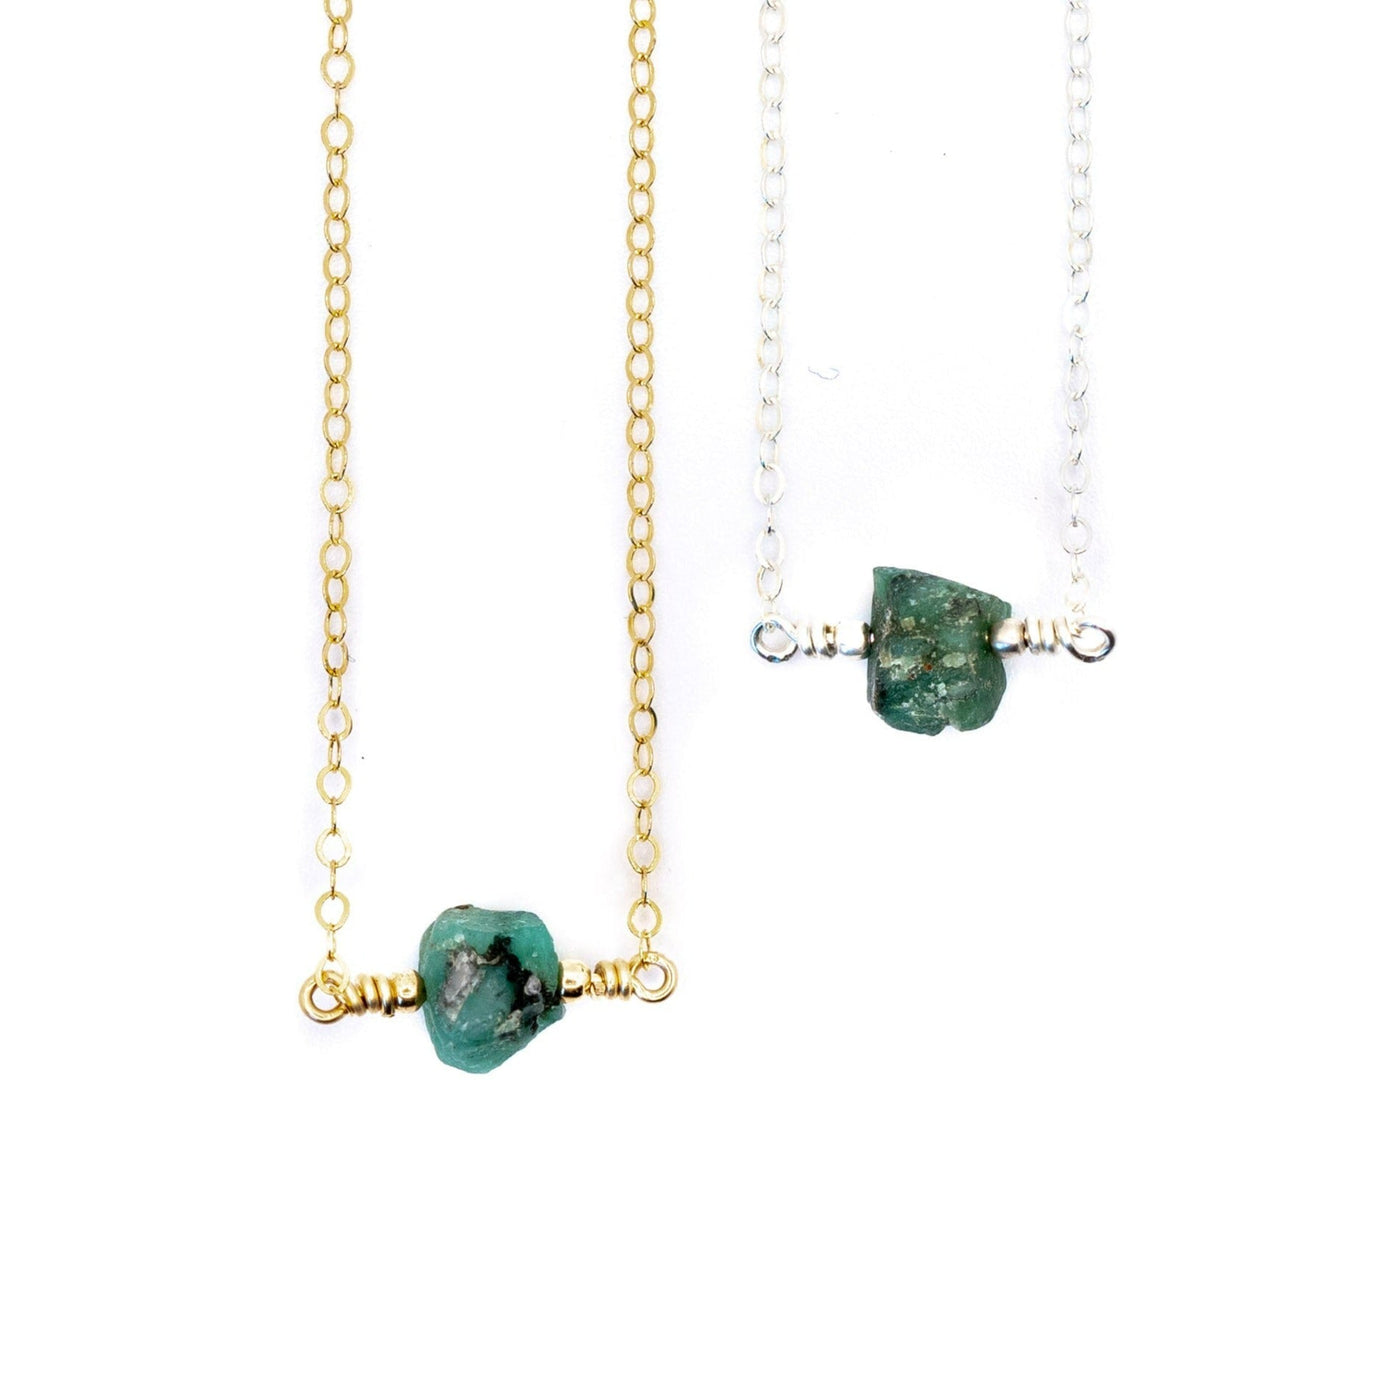 Topaz & Pearl Necklaces Raw Emerald Necklace